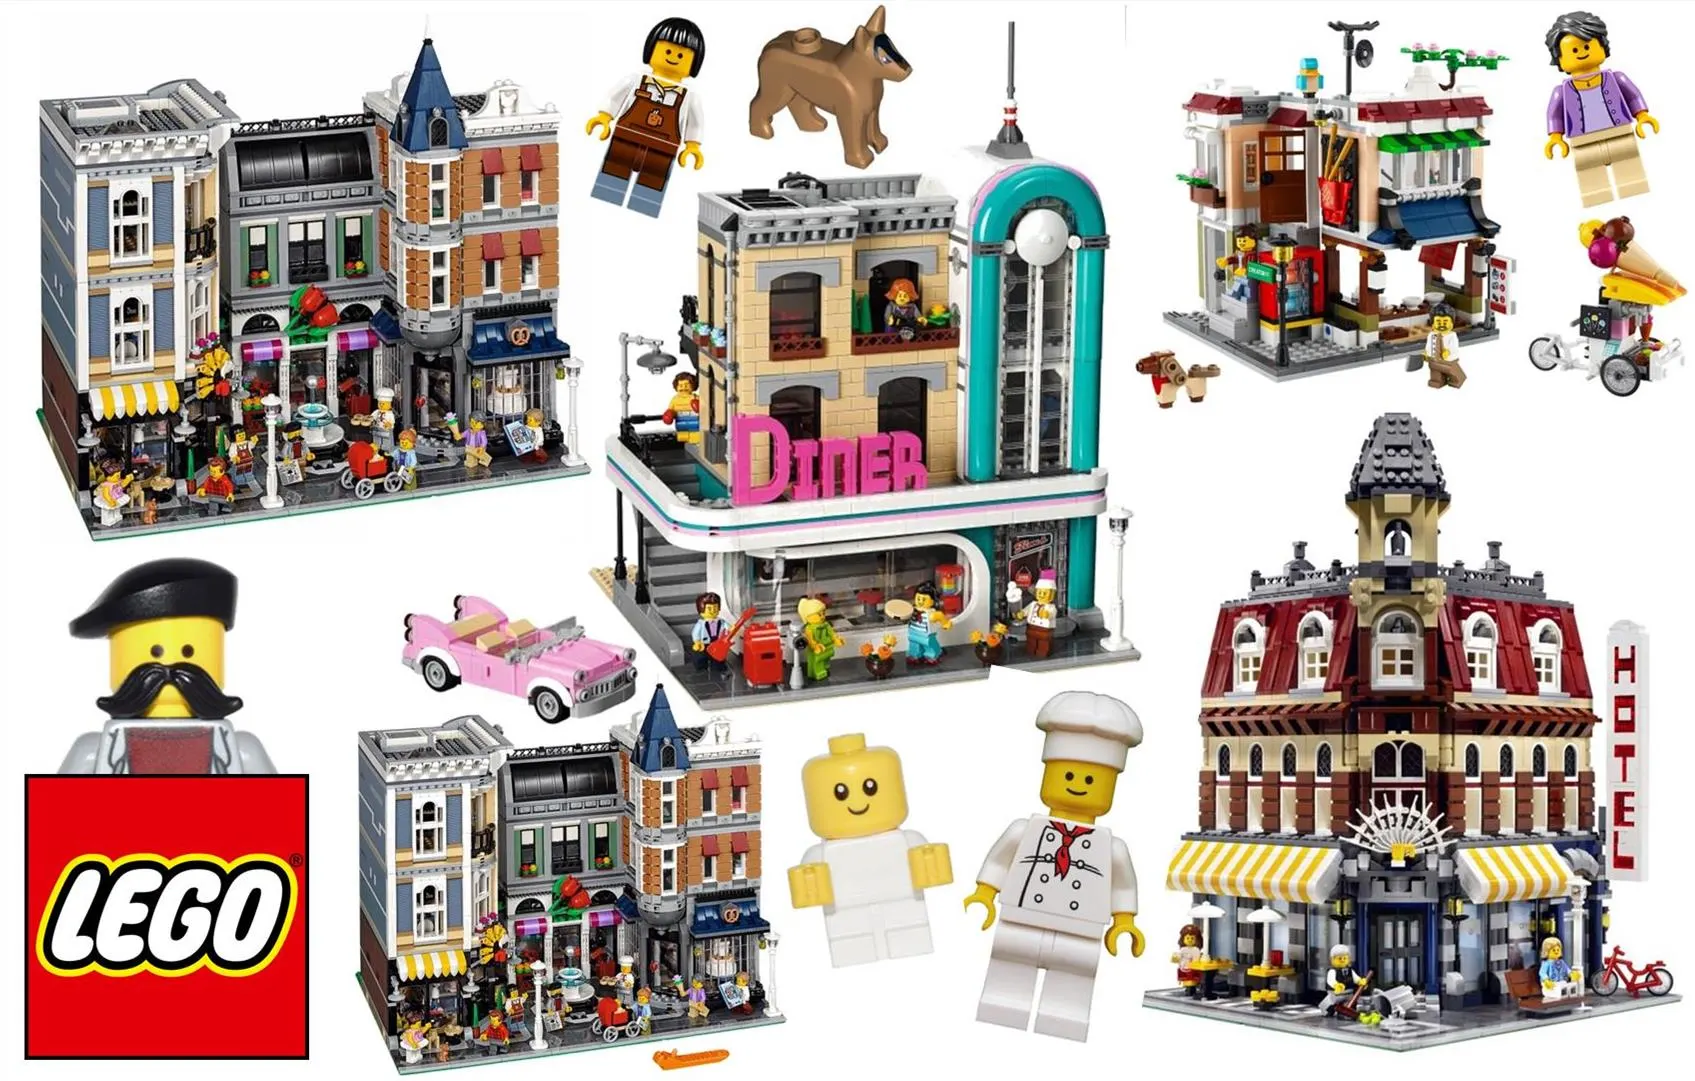 Lot of different LEGO Modular Building collection sets